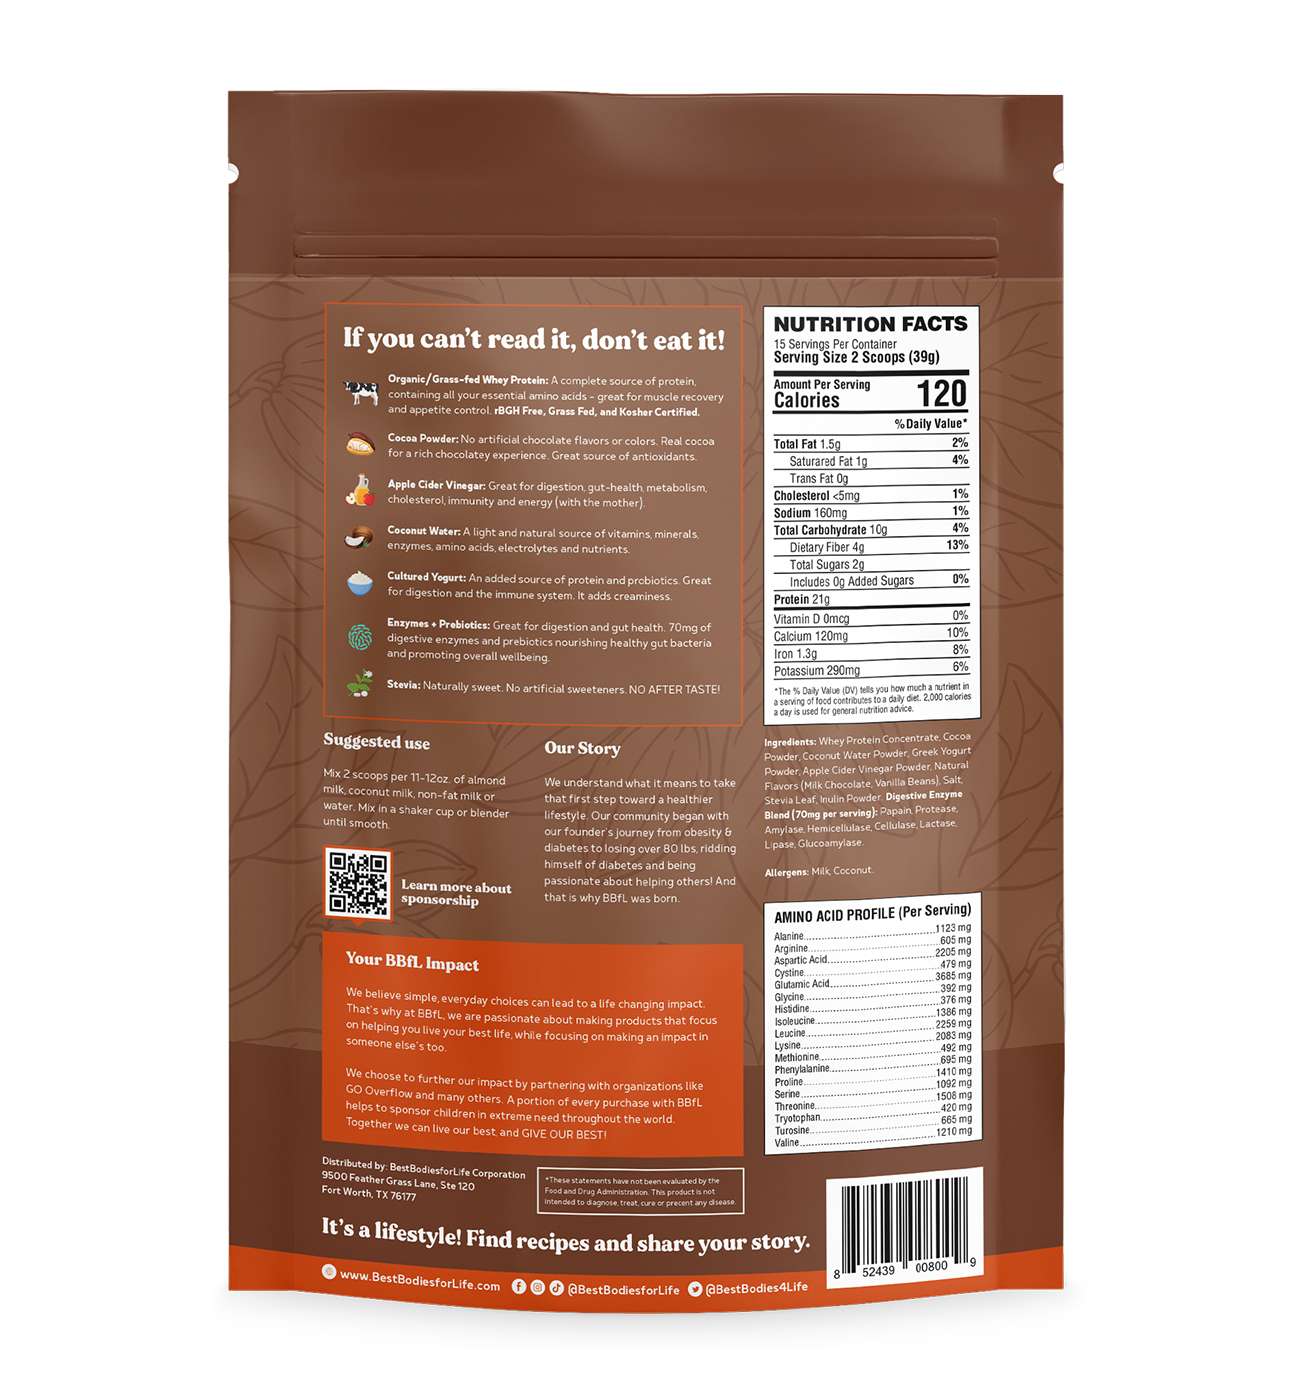 BestBodiesforLife 15g Protein & Meal Replacement Shake - Cocoa Cream; image 2 of 2